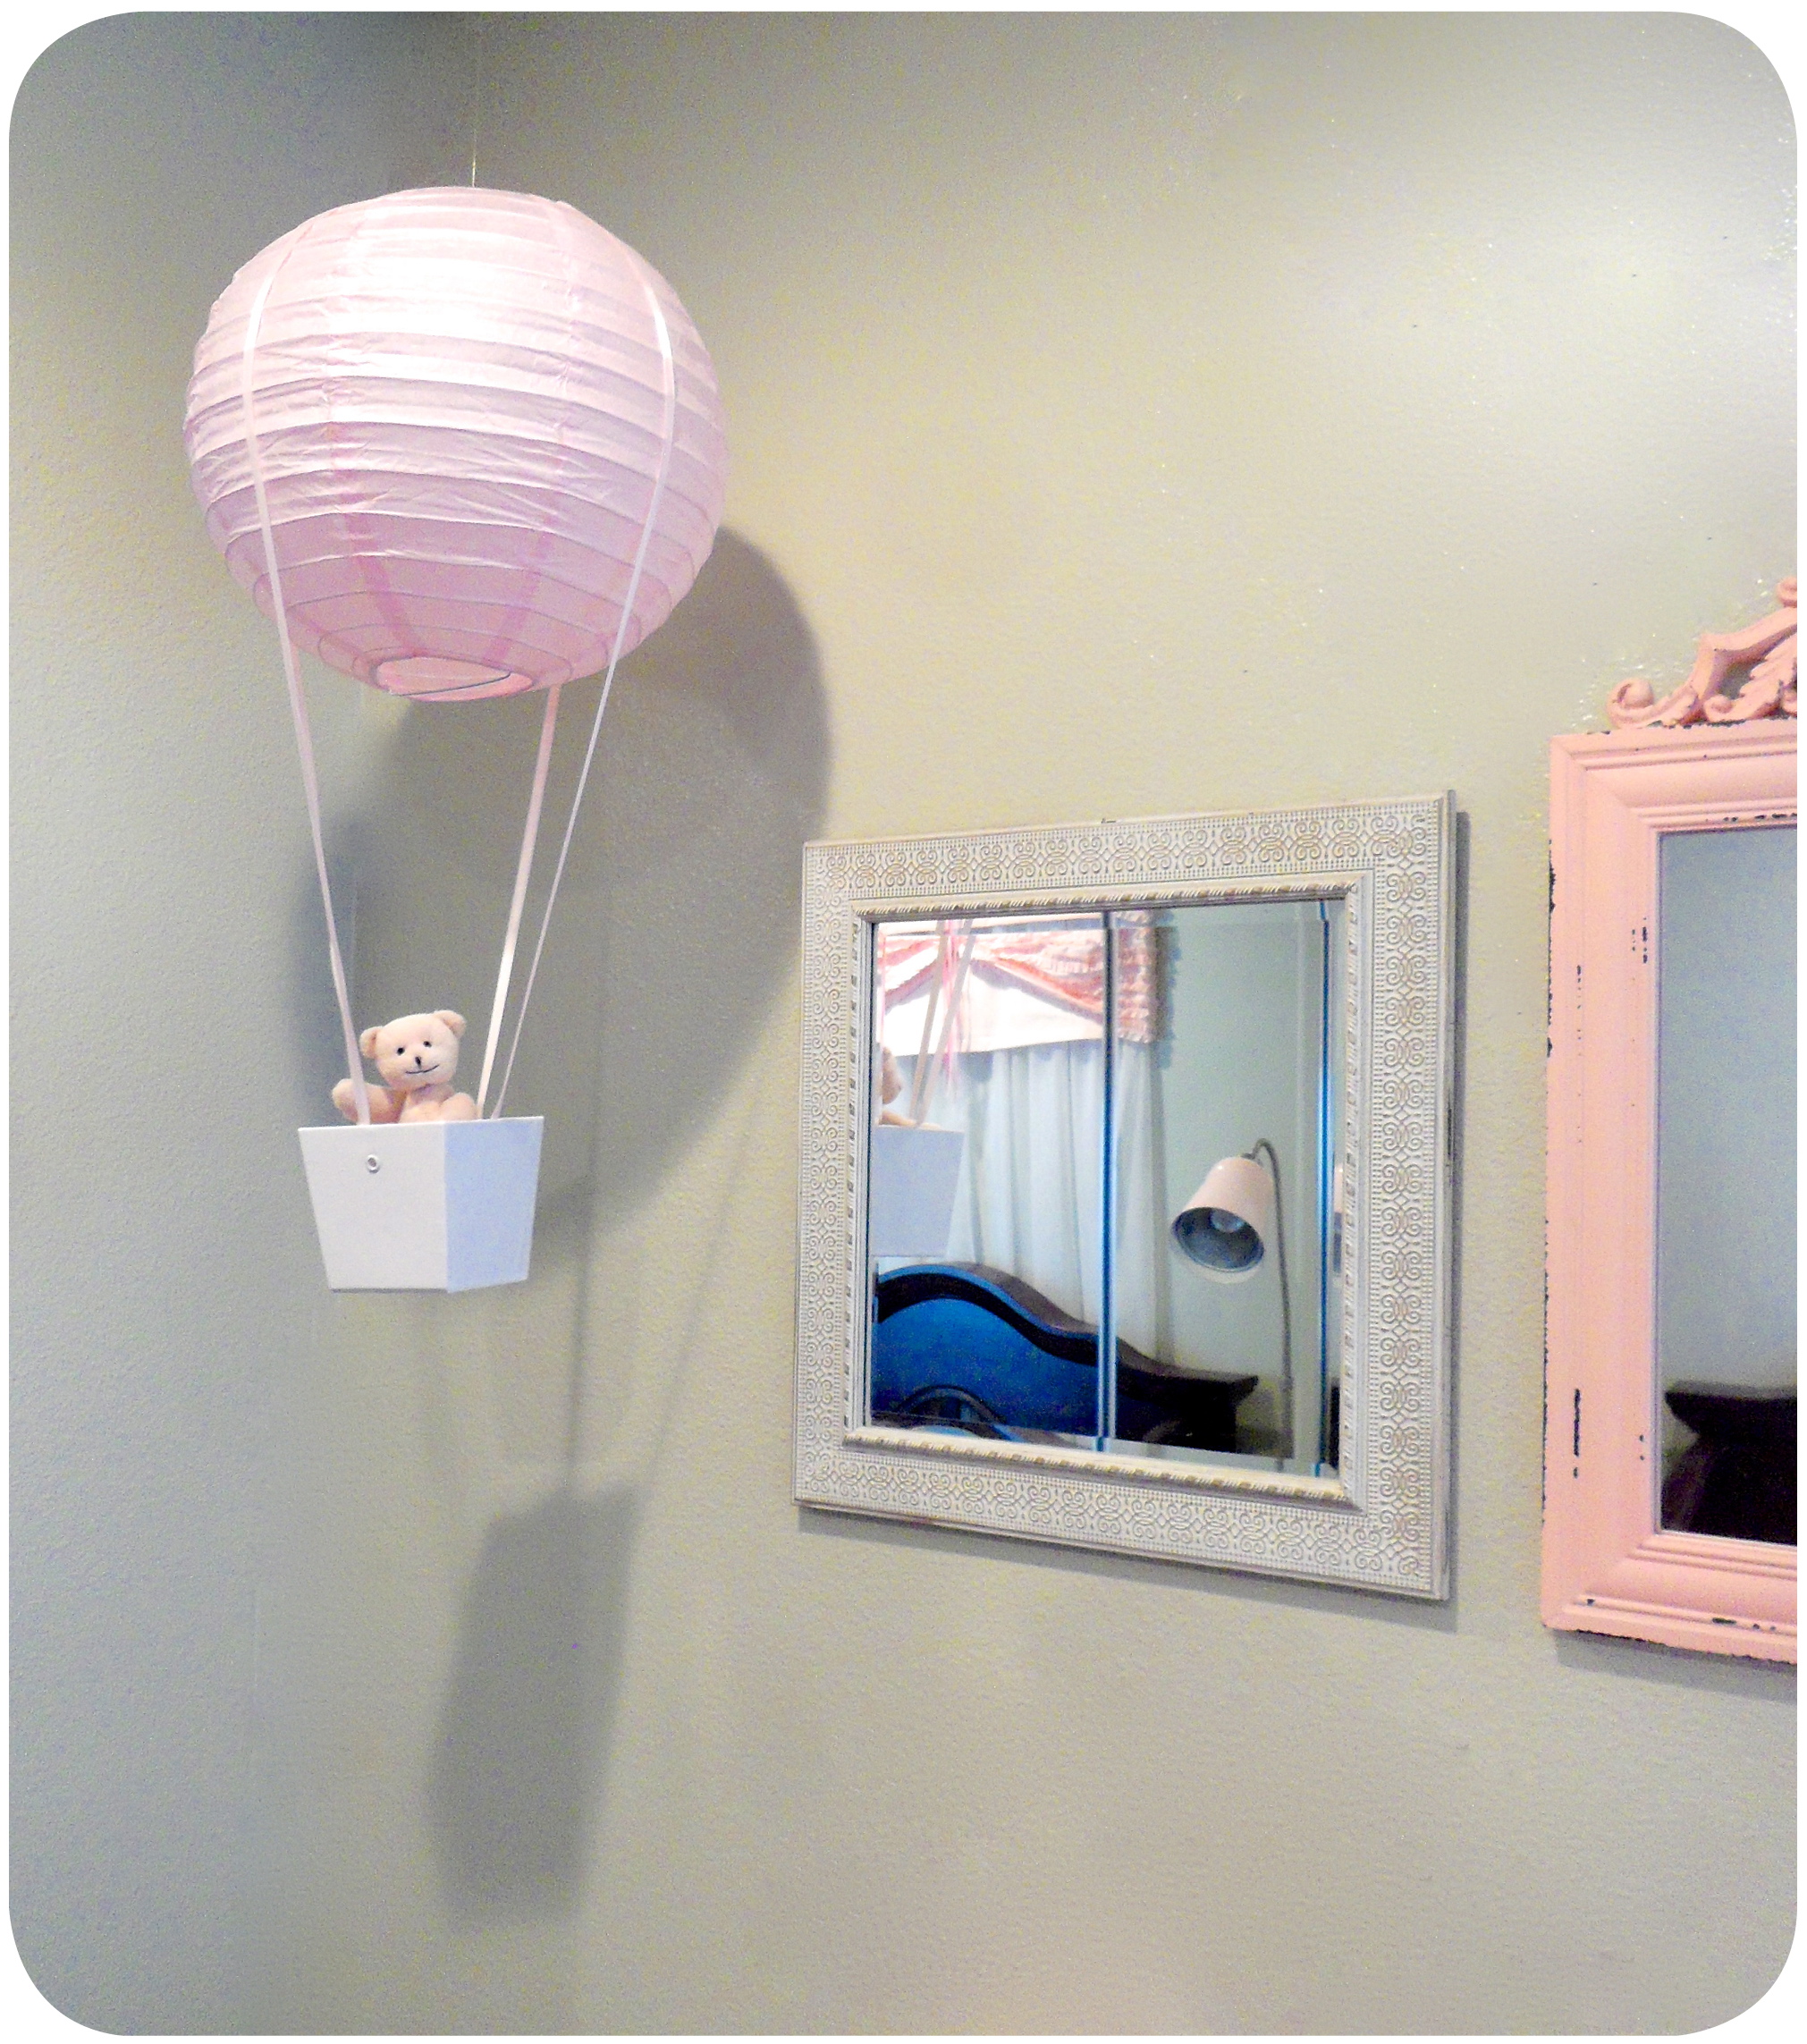 Hot Air Balloon Shaped Lighting For Kids Rooms By Looppa |  notonthehighstreet.com